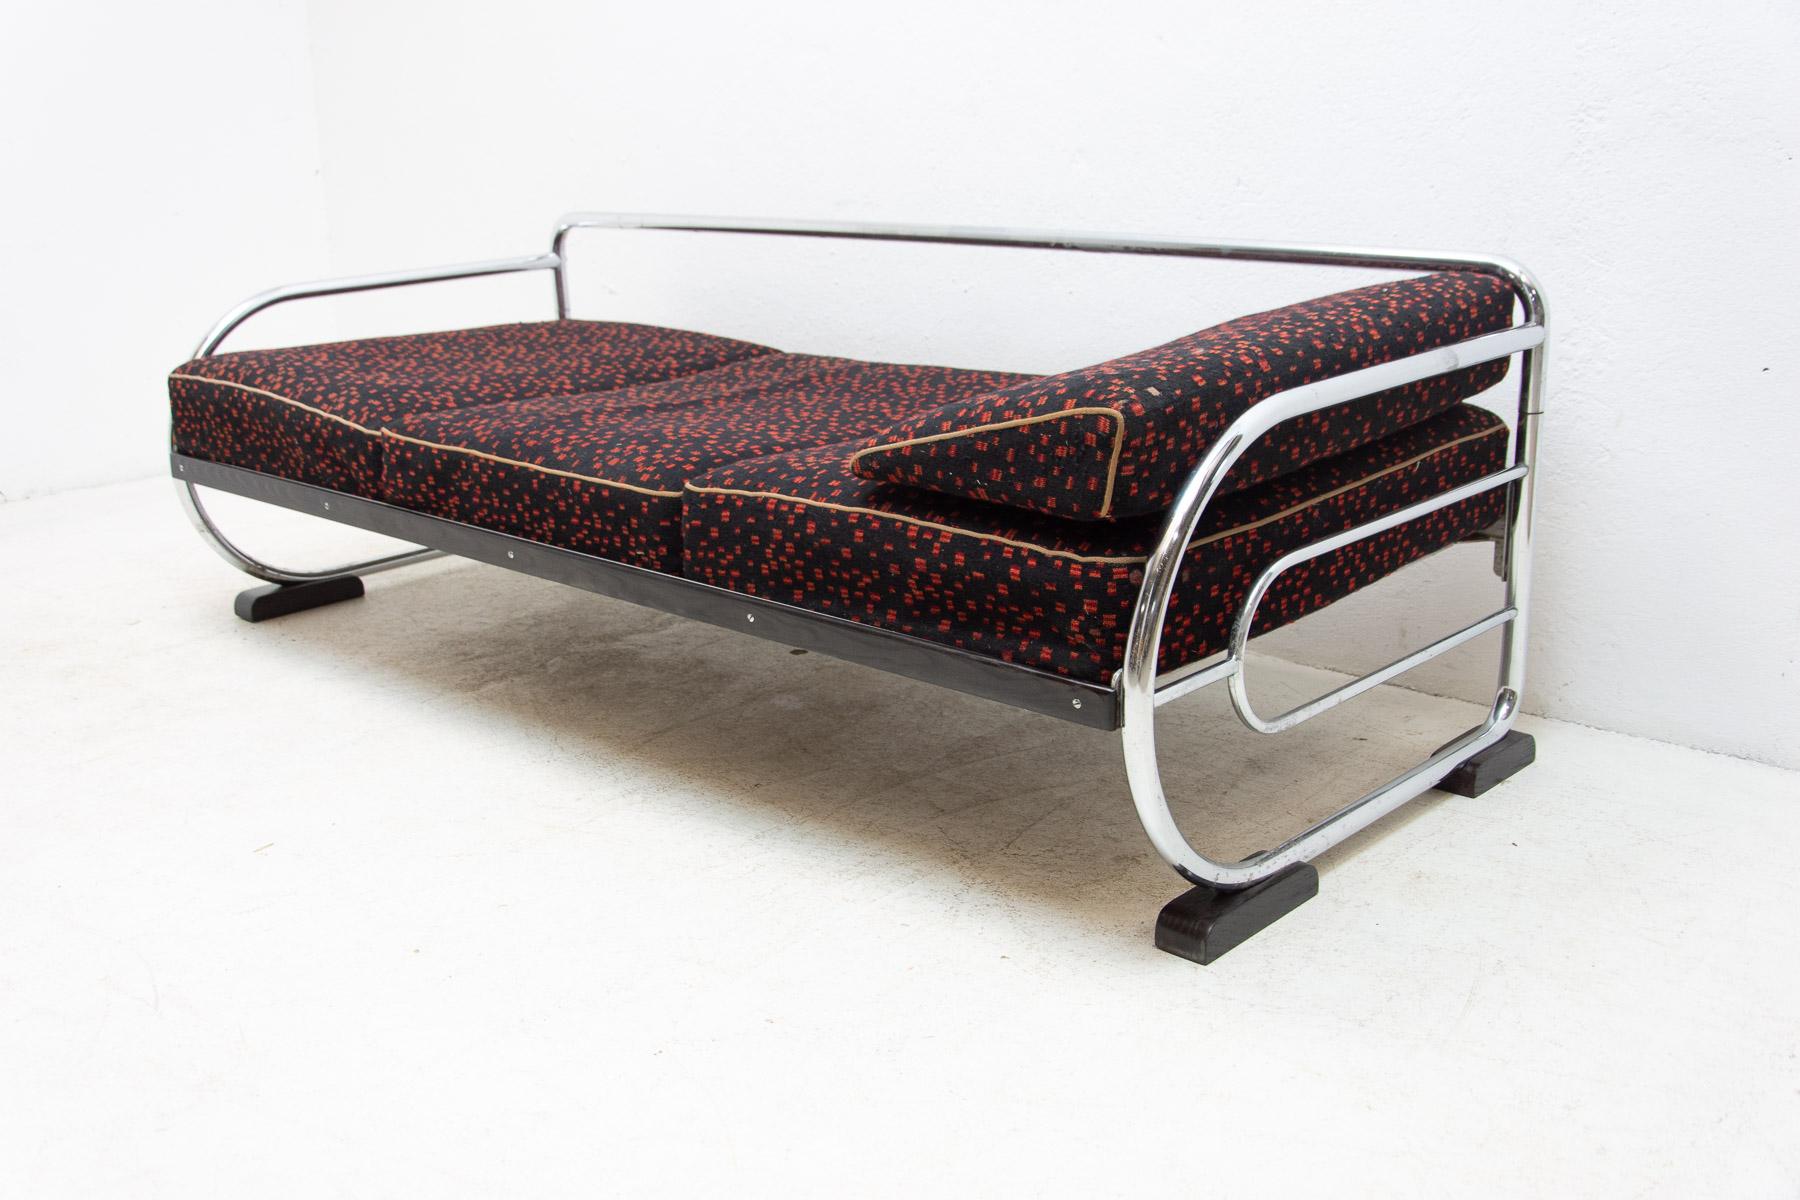 Chromed, tubular steel sofa from the Bauhaus period, 1930s, Bohemia. Made by Hynek Gottwald company. Chrome is in good vintage condition, the mattresses show signs of age and using.
It has four wooden legs.

Height 62 cm

Length 191 cm

Depth 82